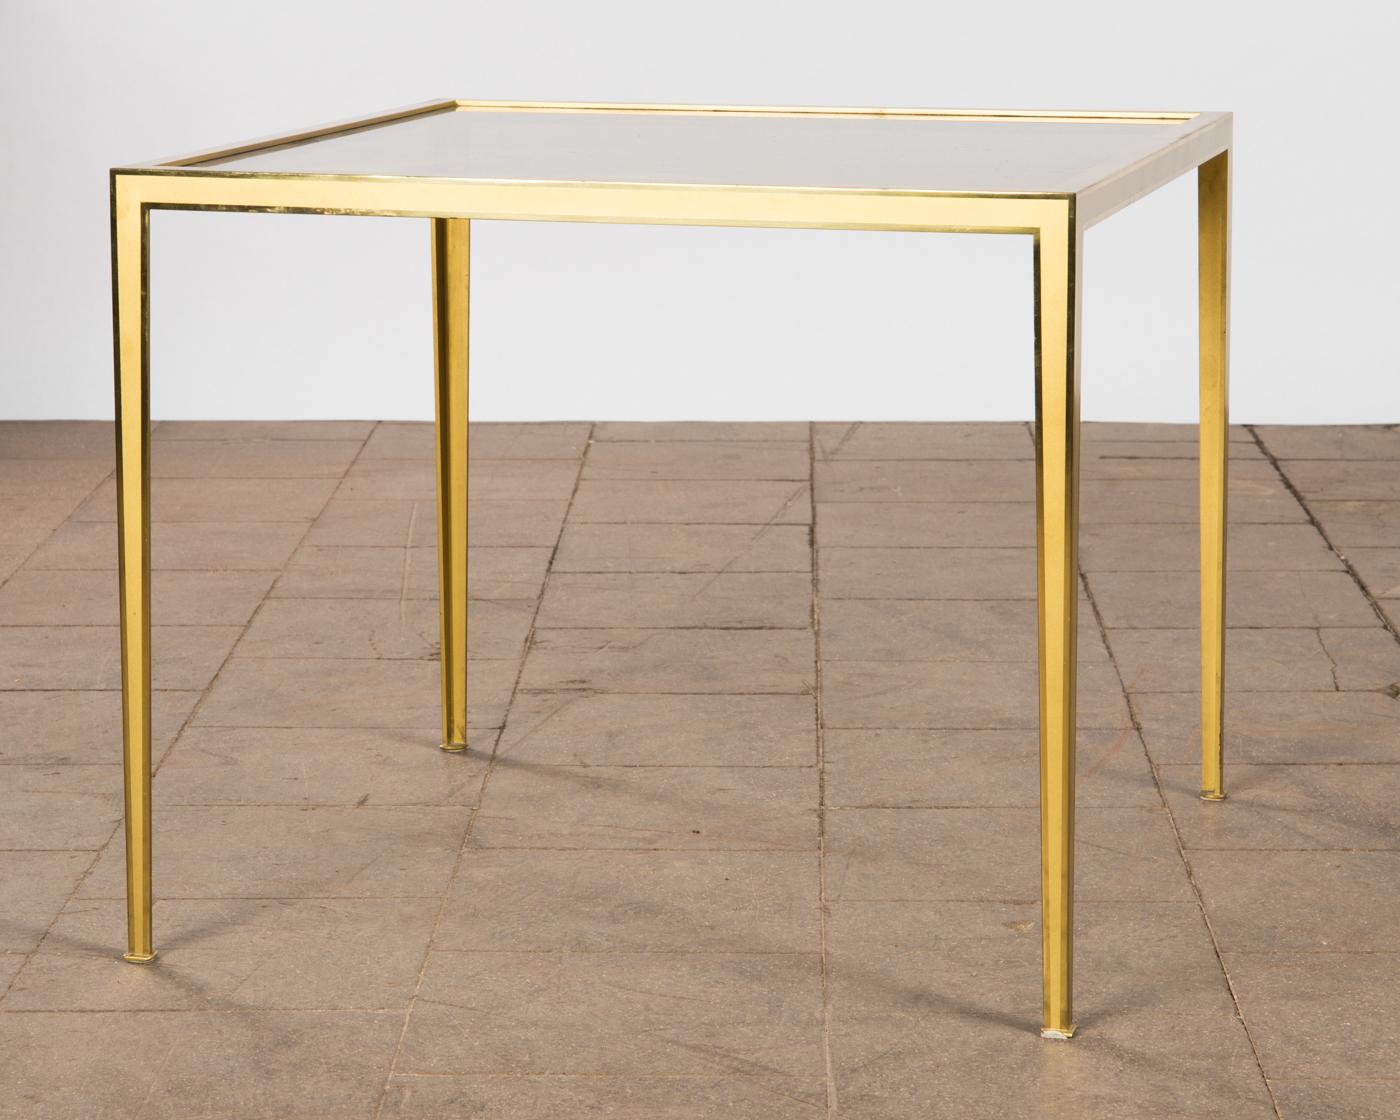 Golden Mid-Century Modern square Brass coffee table by Vereinigte Werkstätten

Coffee or side table produced by German company Vereinigte Werkstätten München in the 1960s. The table is made of brushed messing, the top is made of smoked glass. Good